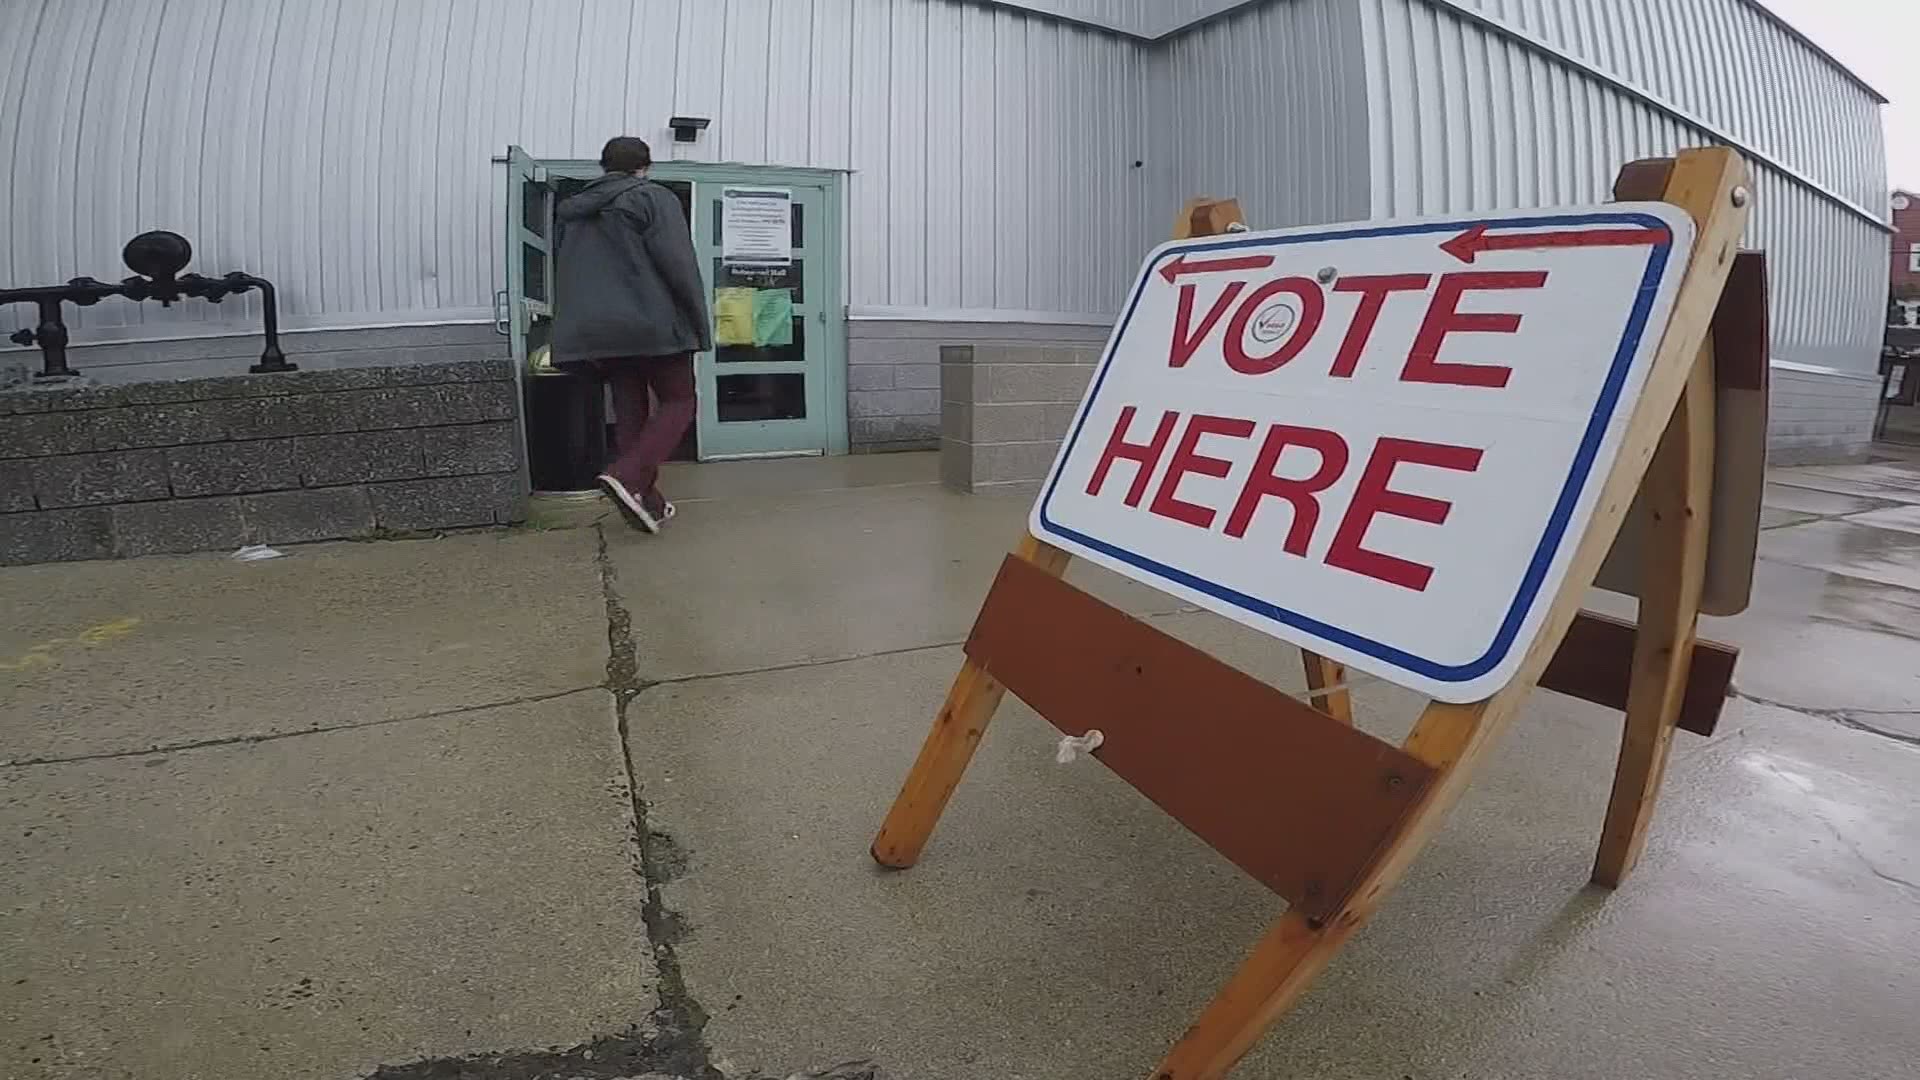 The U.S. Supreme Court turns away a Maine Republican Party appeal that could have kept Ranked Choice Voting from being used in Maine.